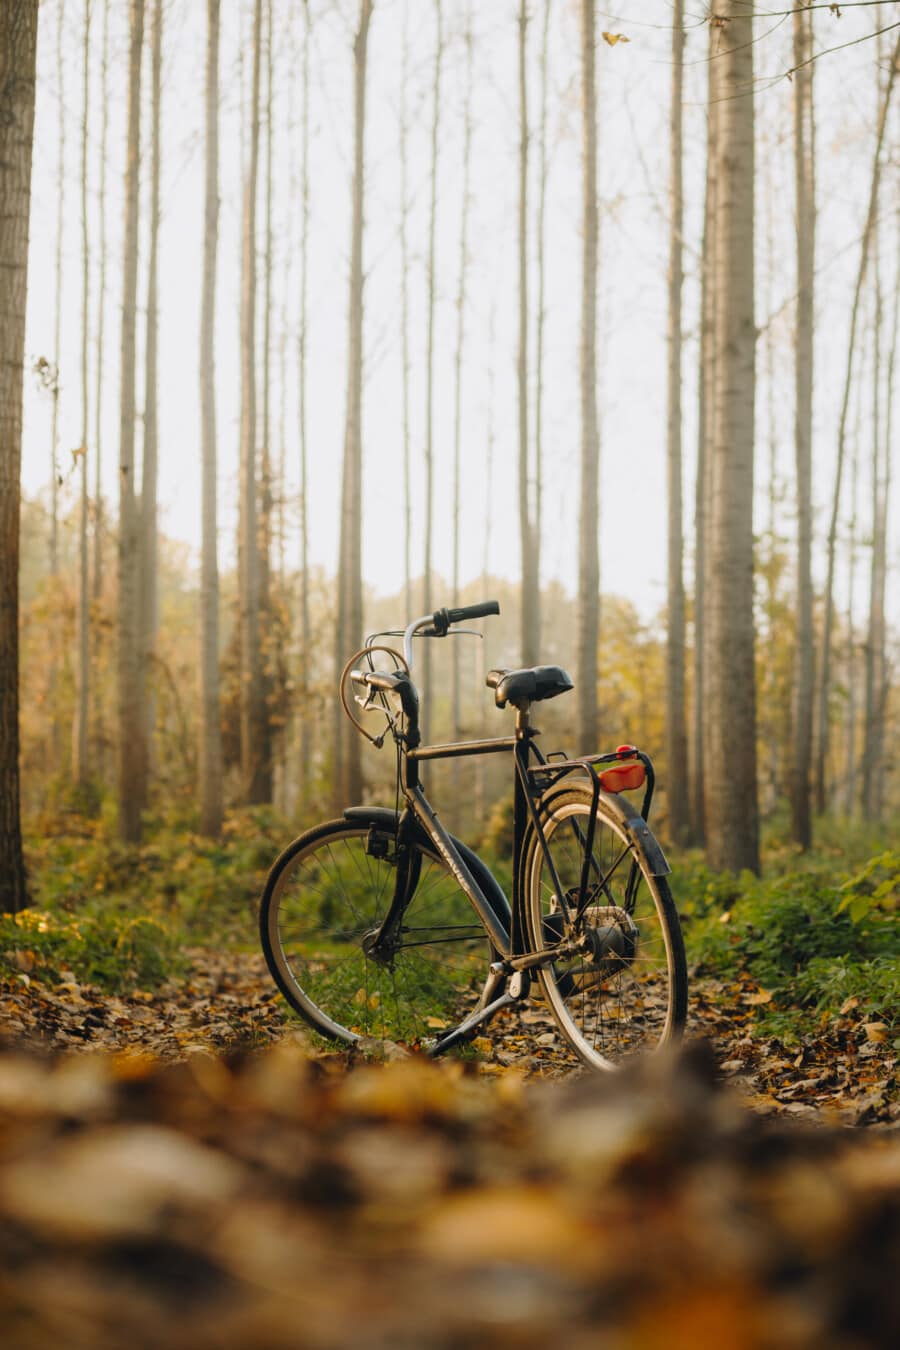 bicycle, black, classic, forest trail, autumn season, bike, nature, outdoors, trail, vehicle